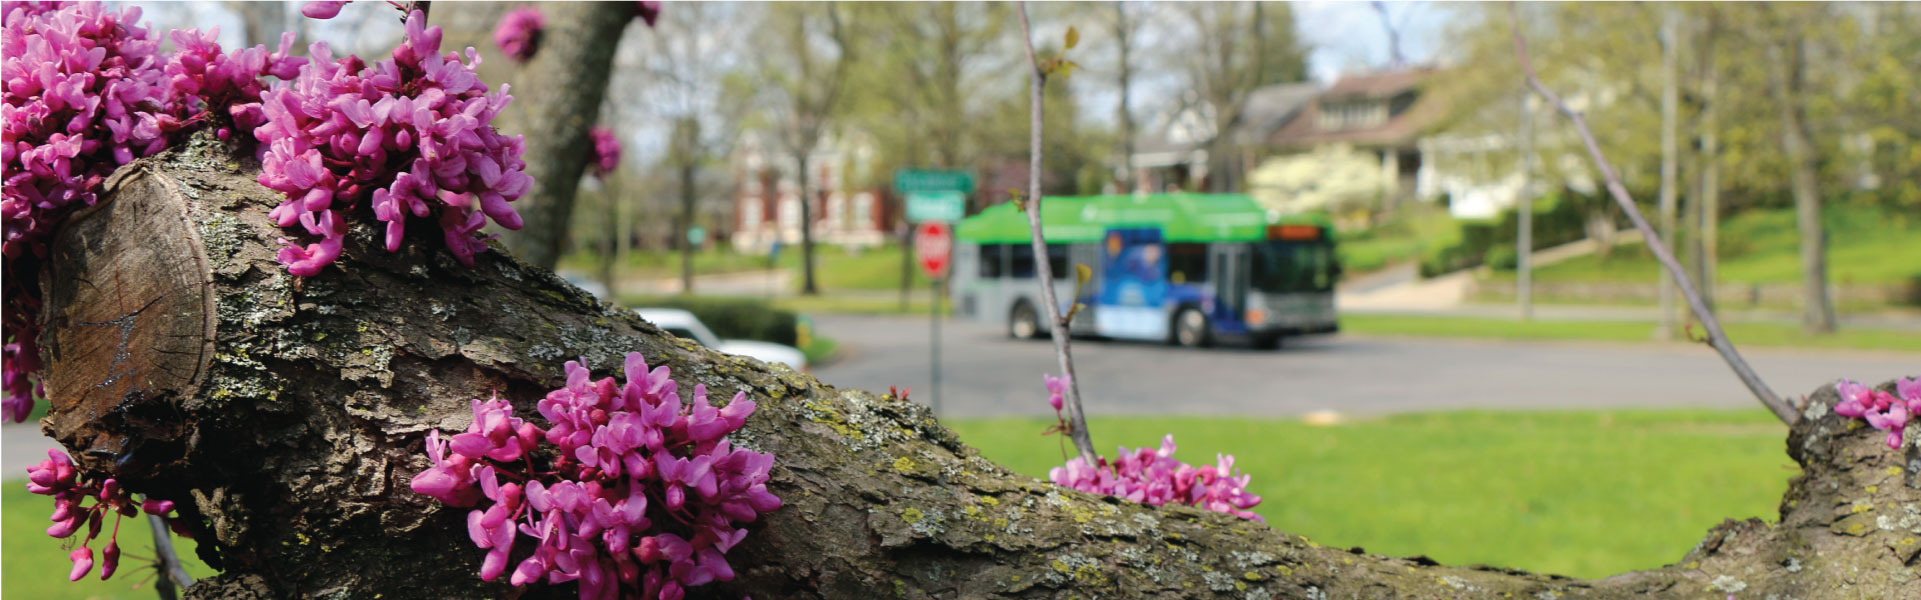 Lextran bus surrounded by spring flowers